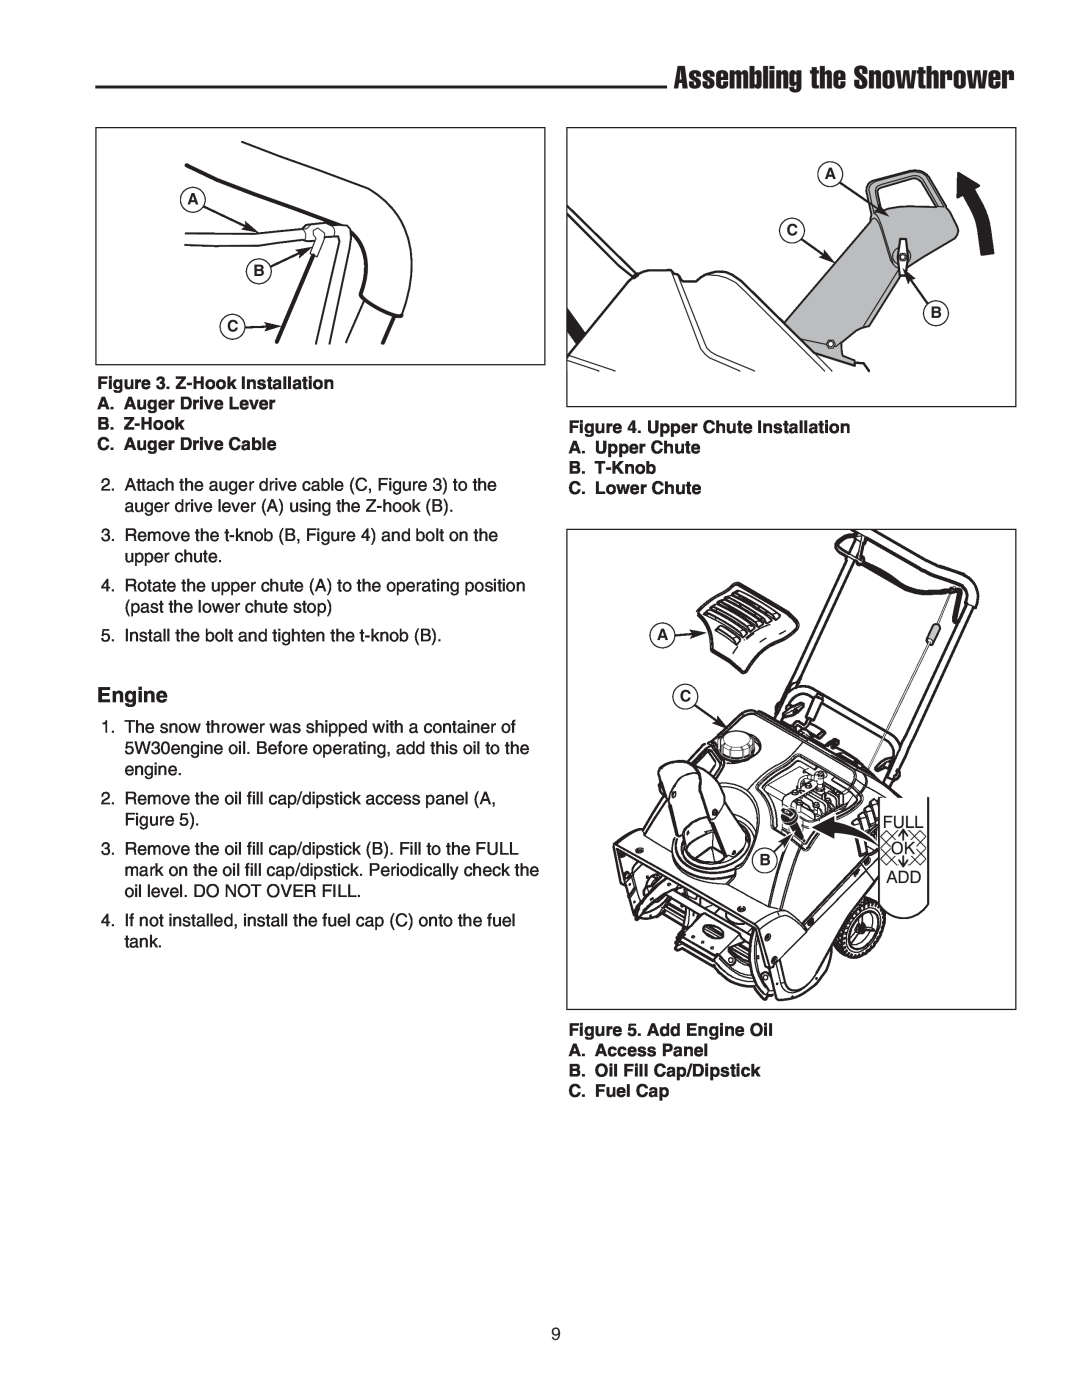 Snapper 522E Assembling the Snowthrower, Engine, Z-Hook Installation A. Auger Drive Lever B. Z-Hook, C. Auger Drive Cable 